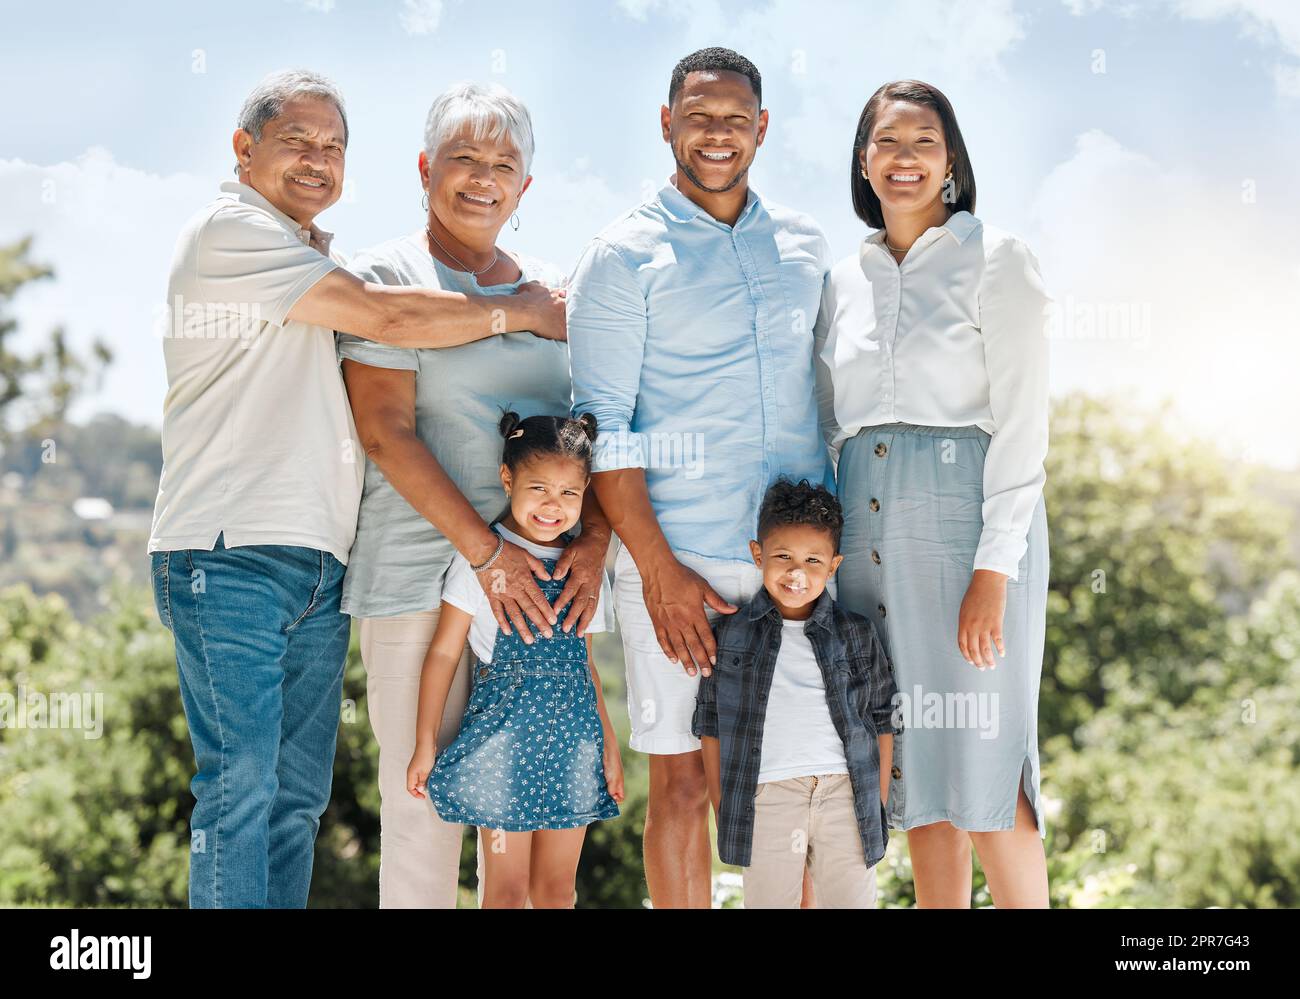 Im so proud of my family. Shot of a multi-generational family standing together outside. Stock Photo